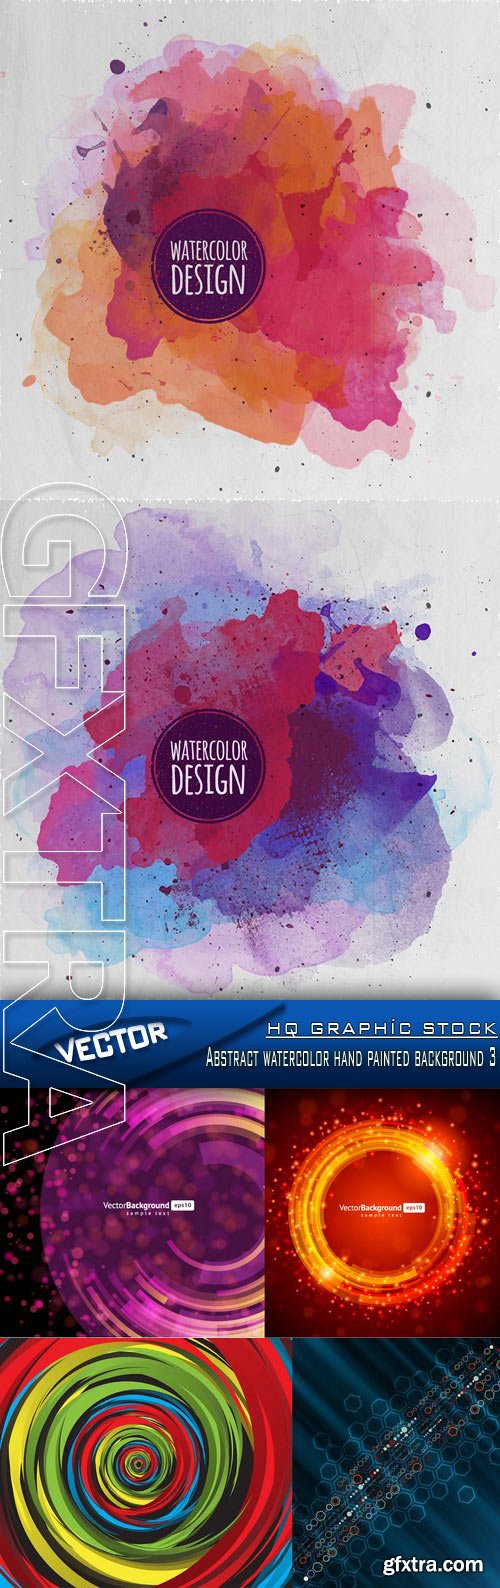 Stock Vector - Abstract watercolor hand painted background 3